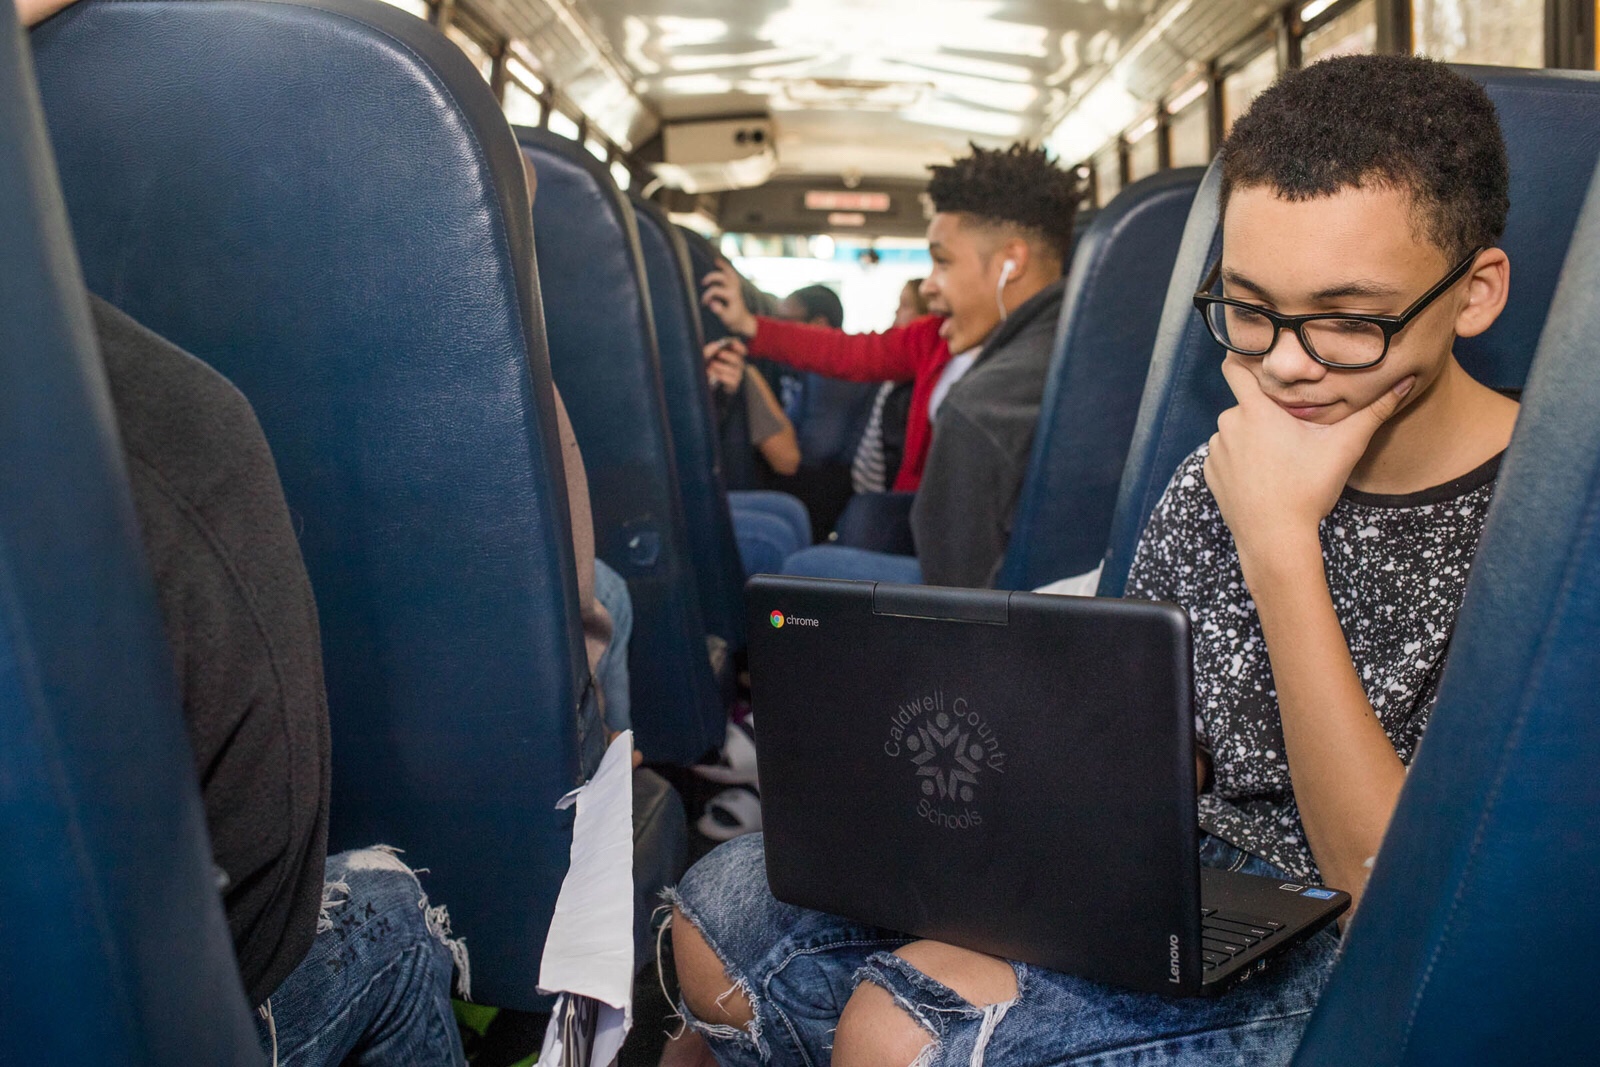 Google has equipped rural school buses with WiFi and Chromebooks